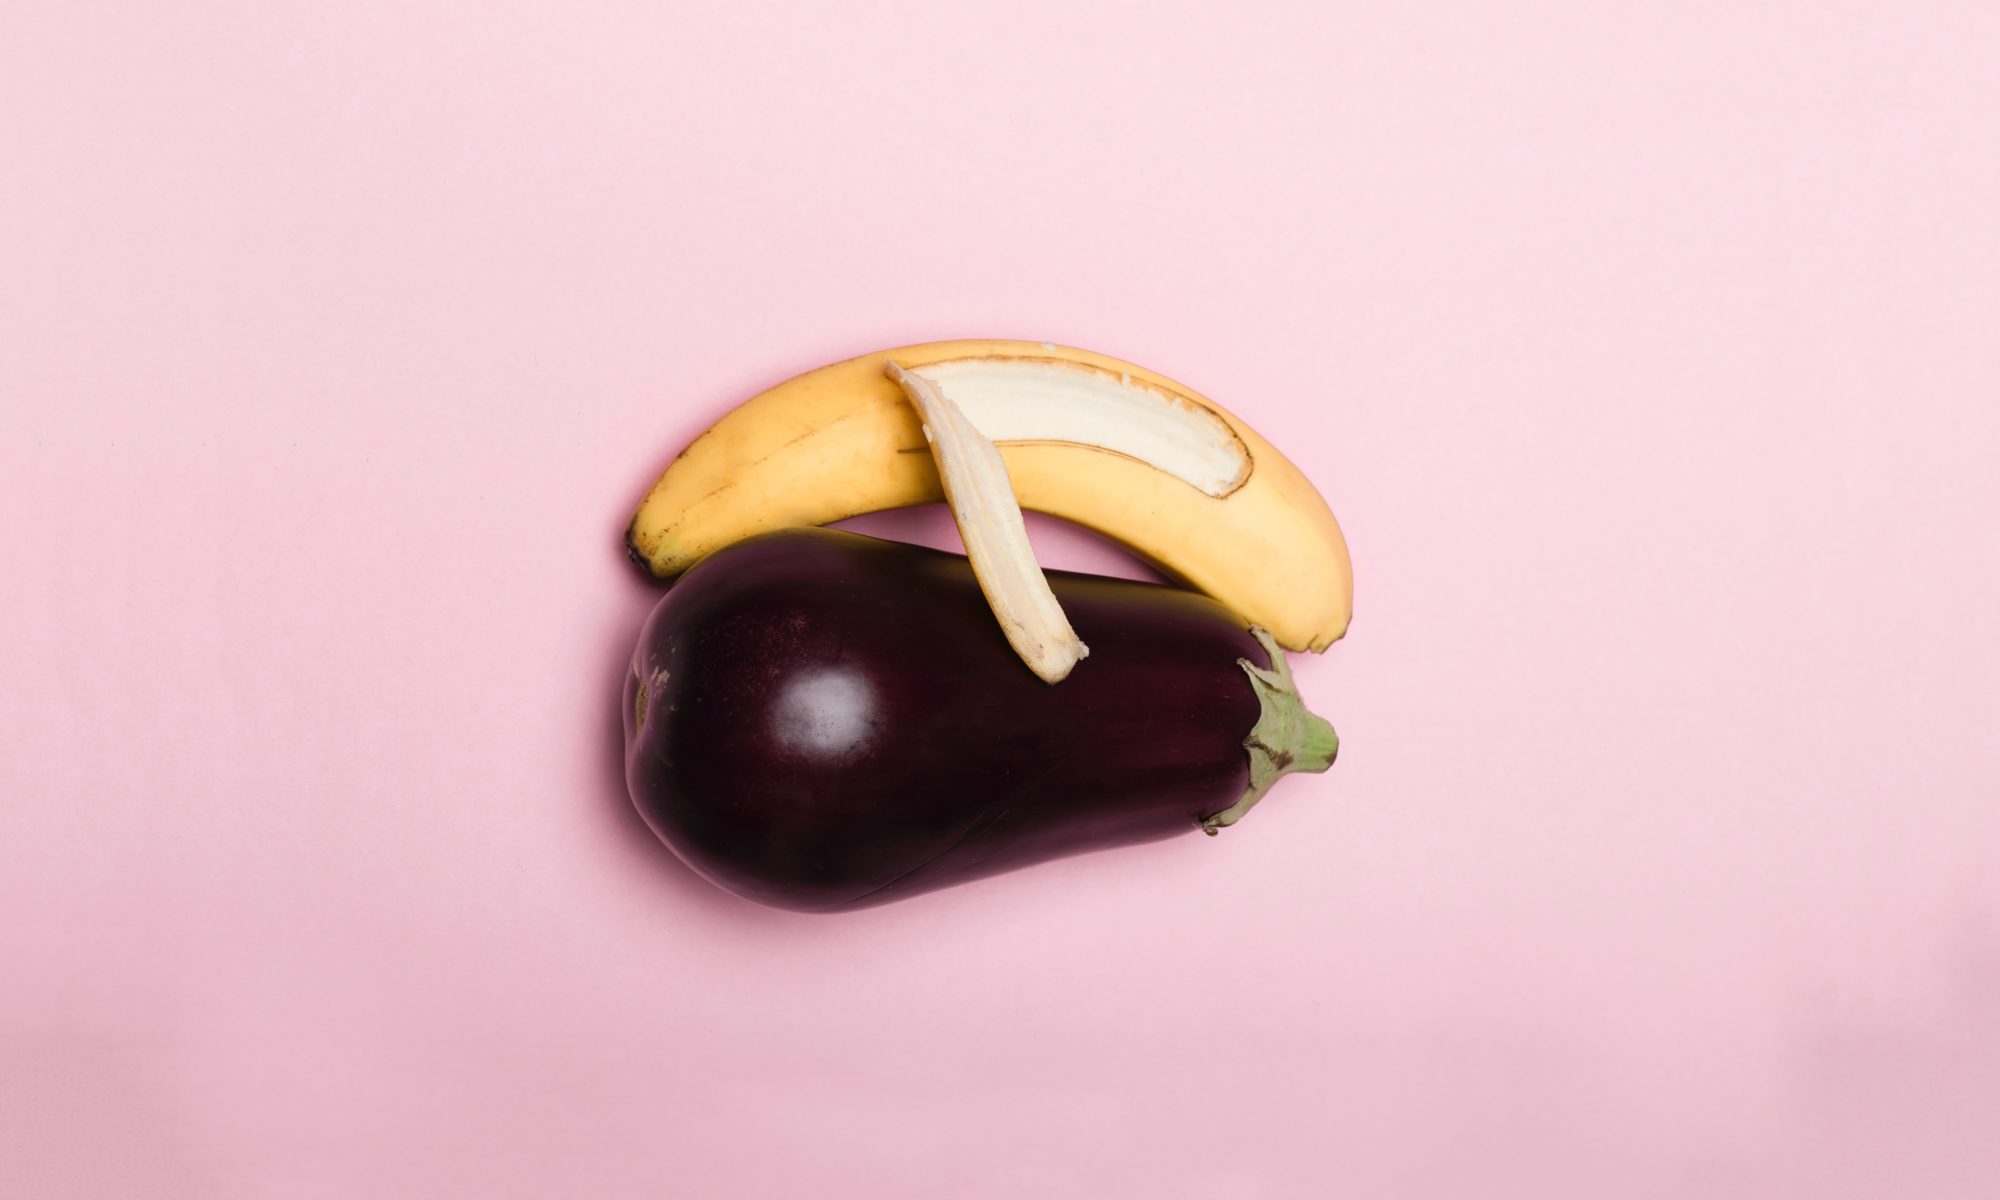 A banana spooning an eggplant with a light pink background.